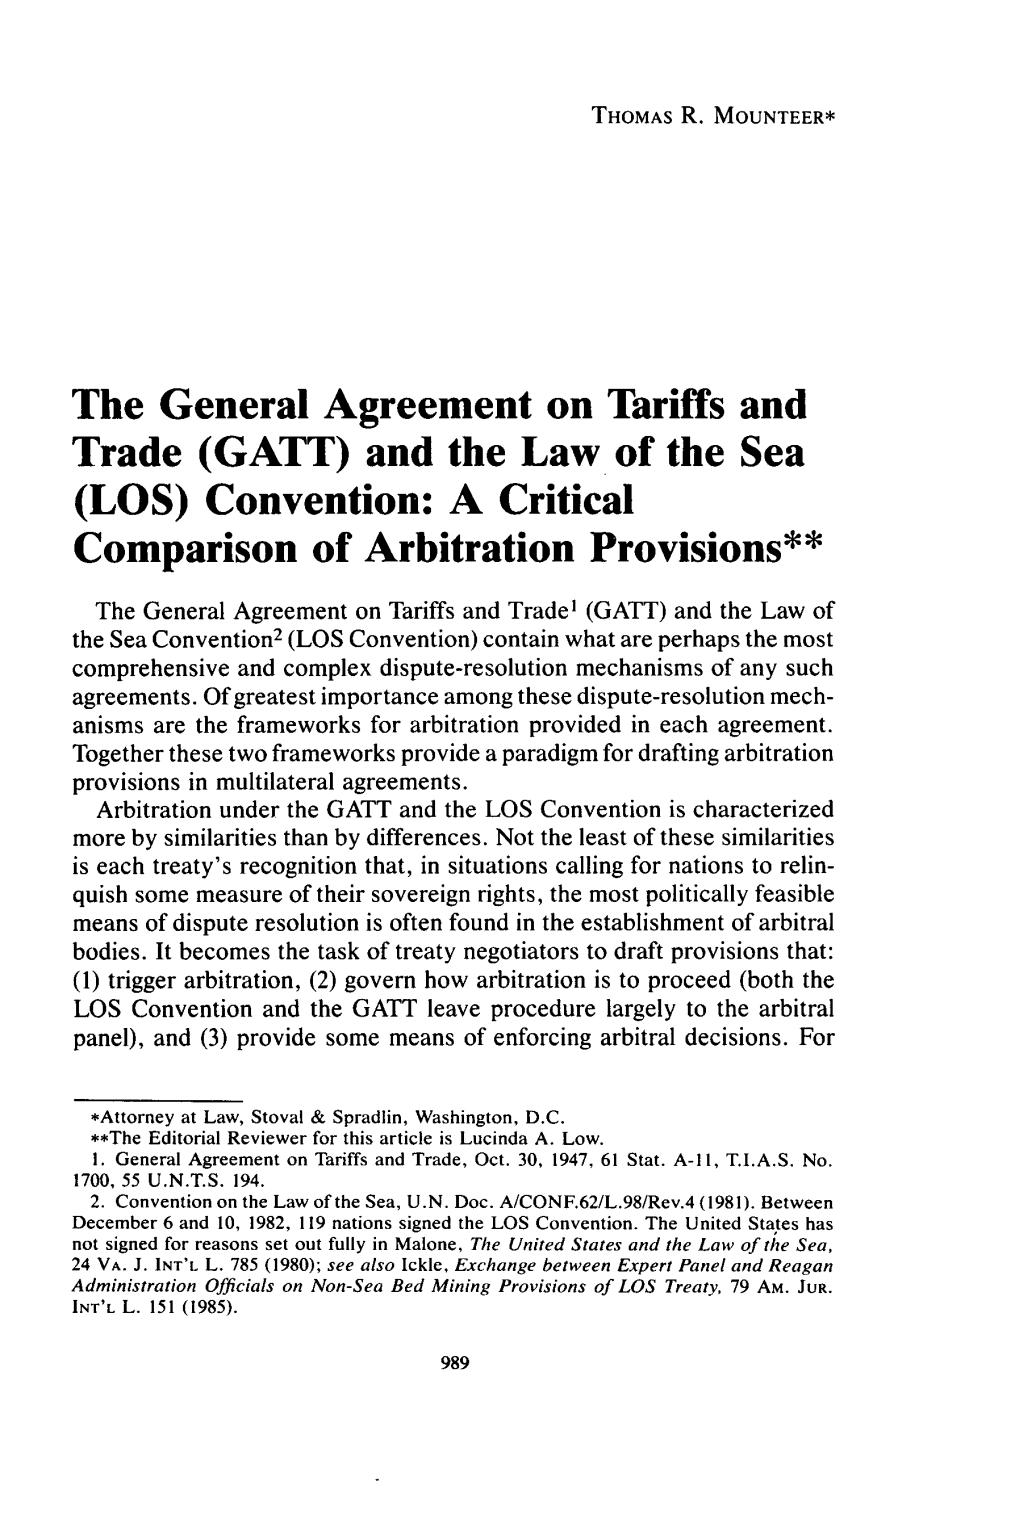 (GATT) and the Law of the Sea (LOS) Convention